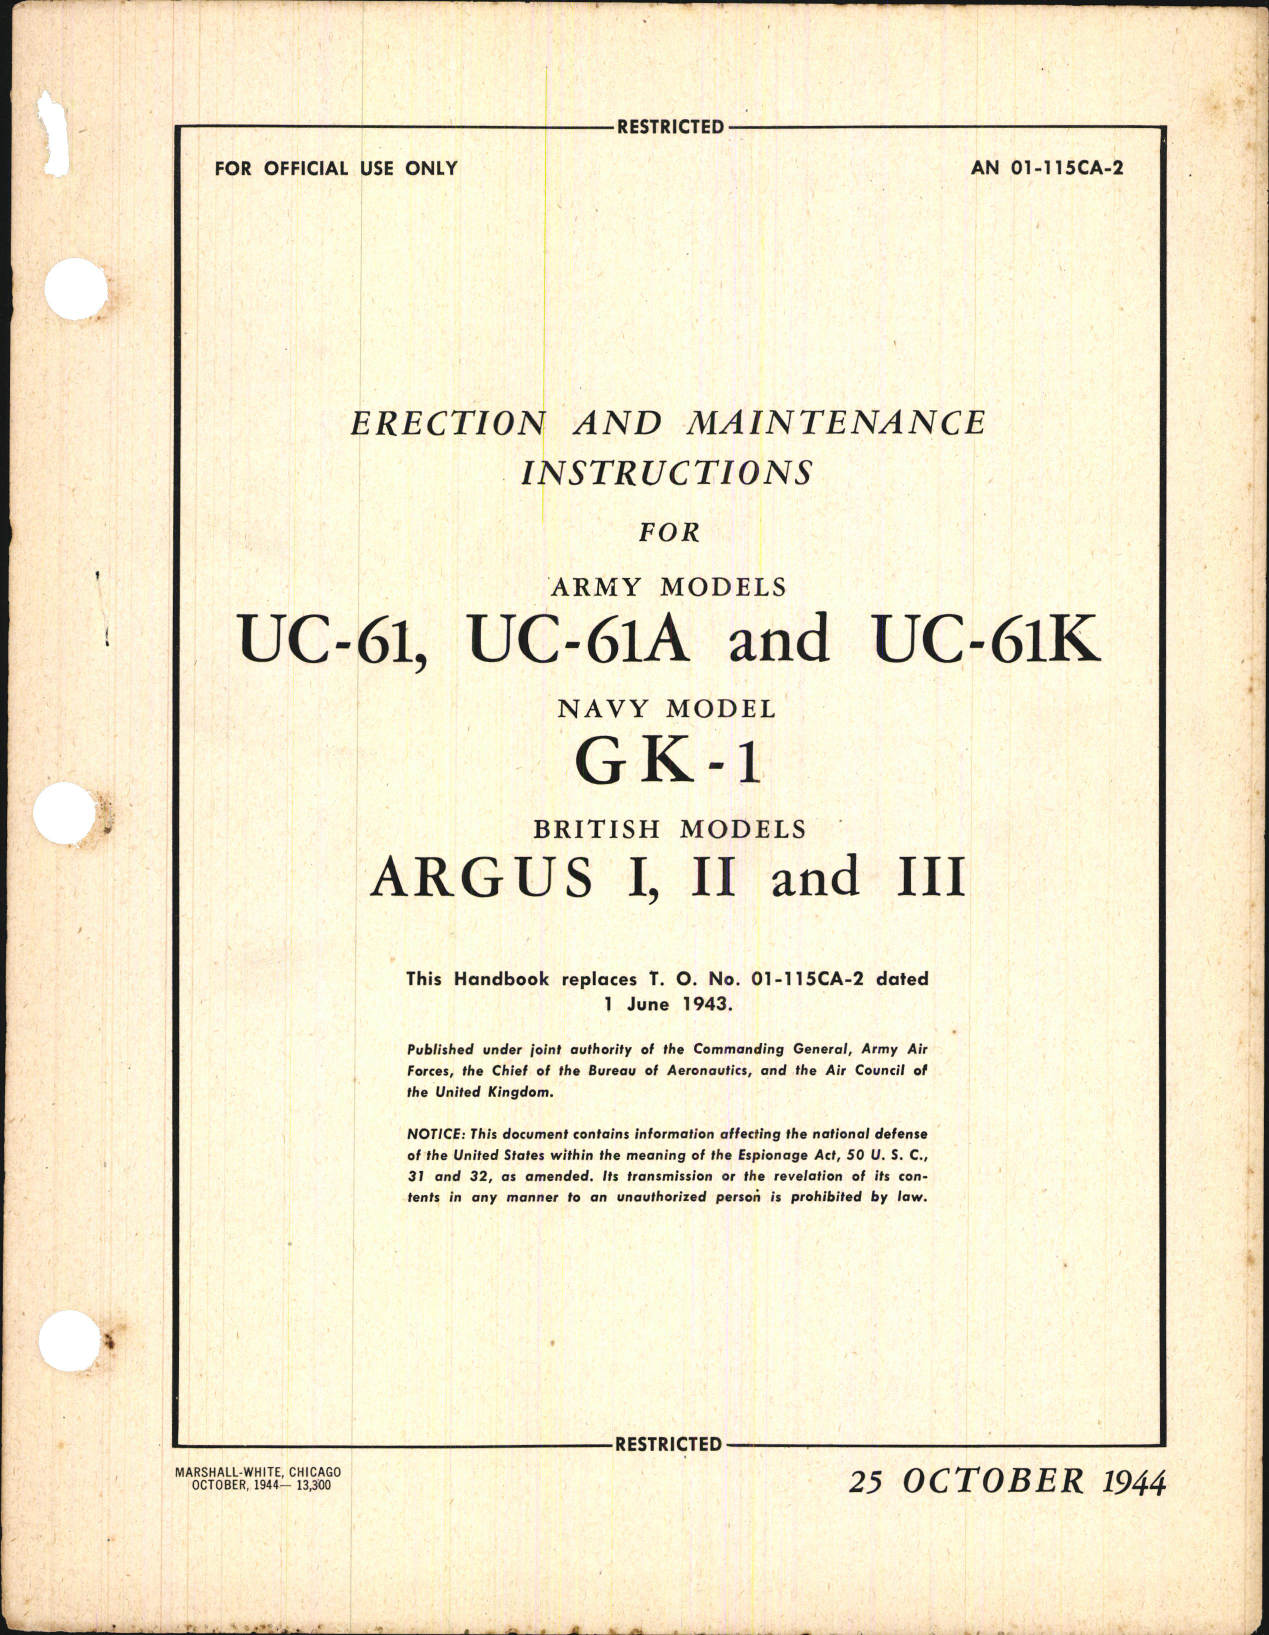 Sample page 1 from AirCorps Library document: Erection and Maintenance Instructions for UC-61, UC-61A, UC-61K, GK-1